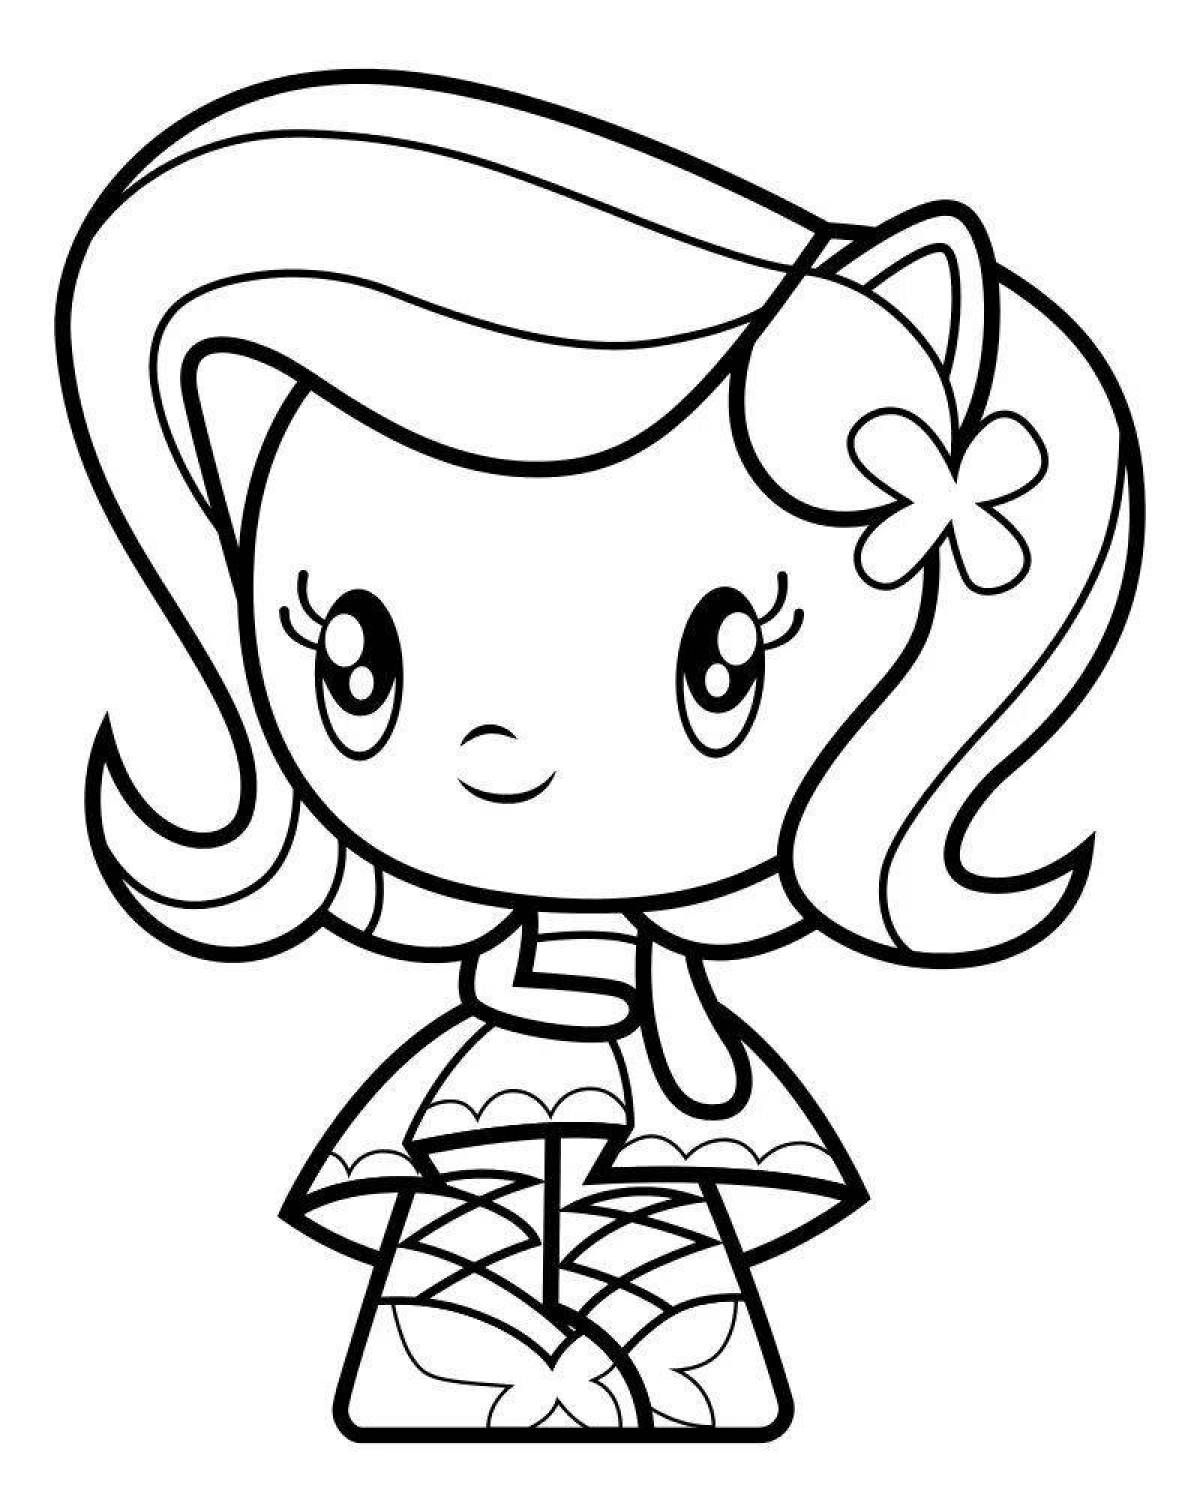 Cute pony coloring page for girls